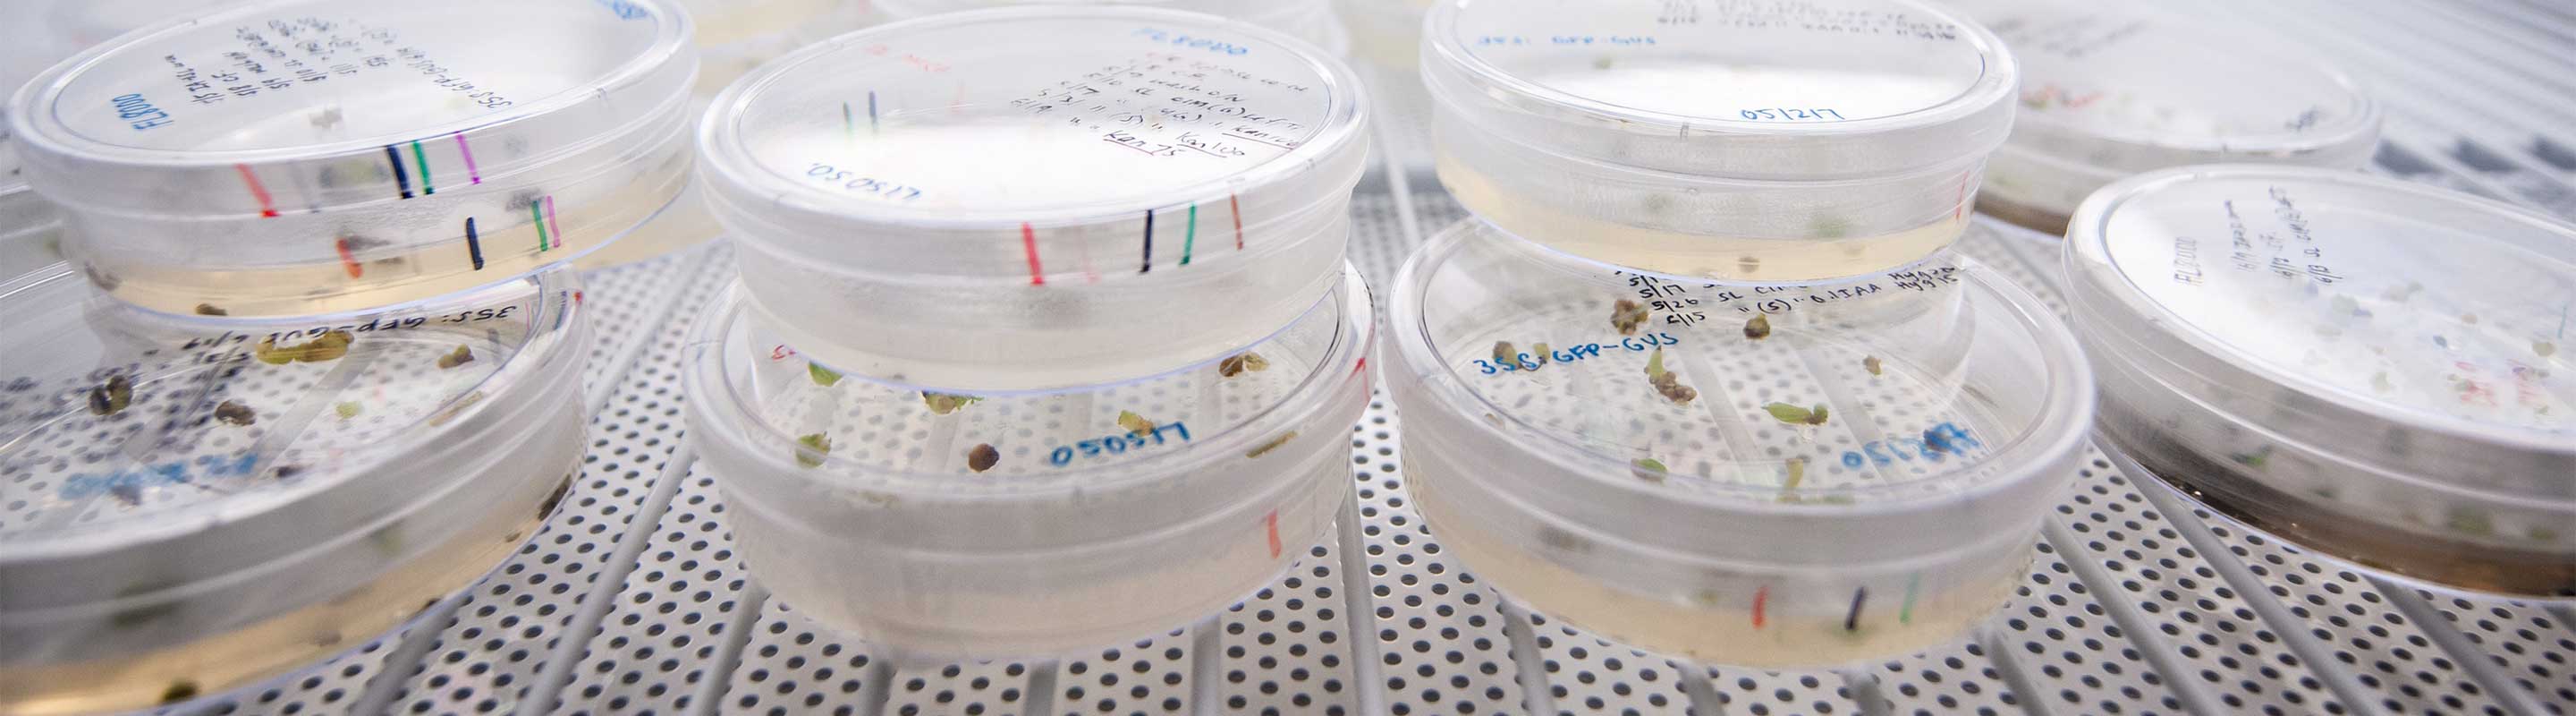 petri dishes with research samples